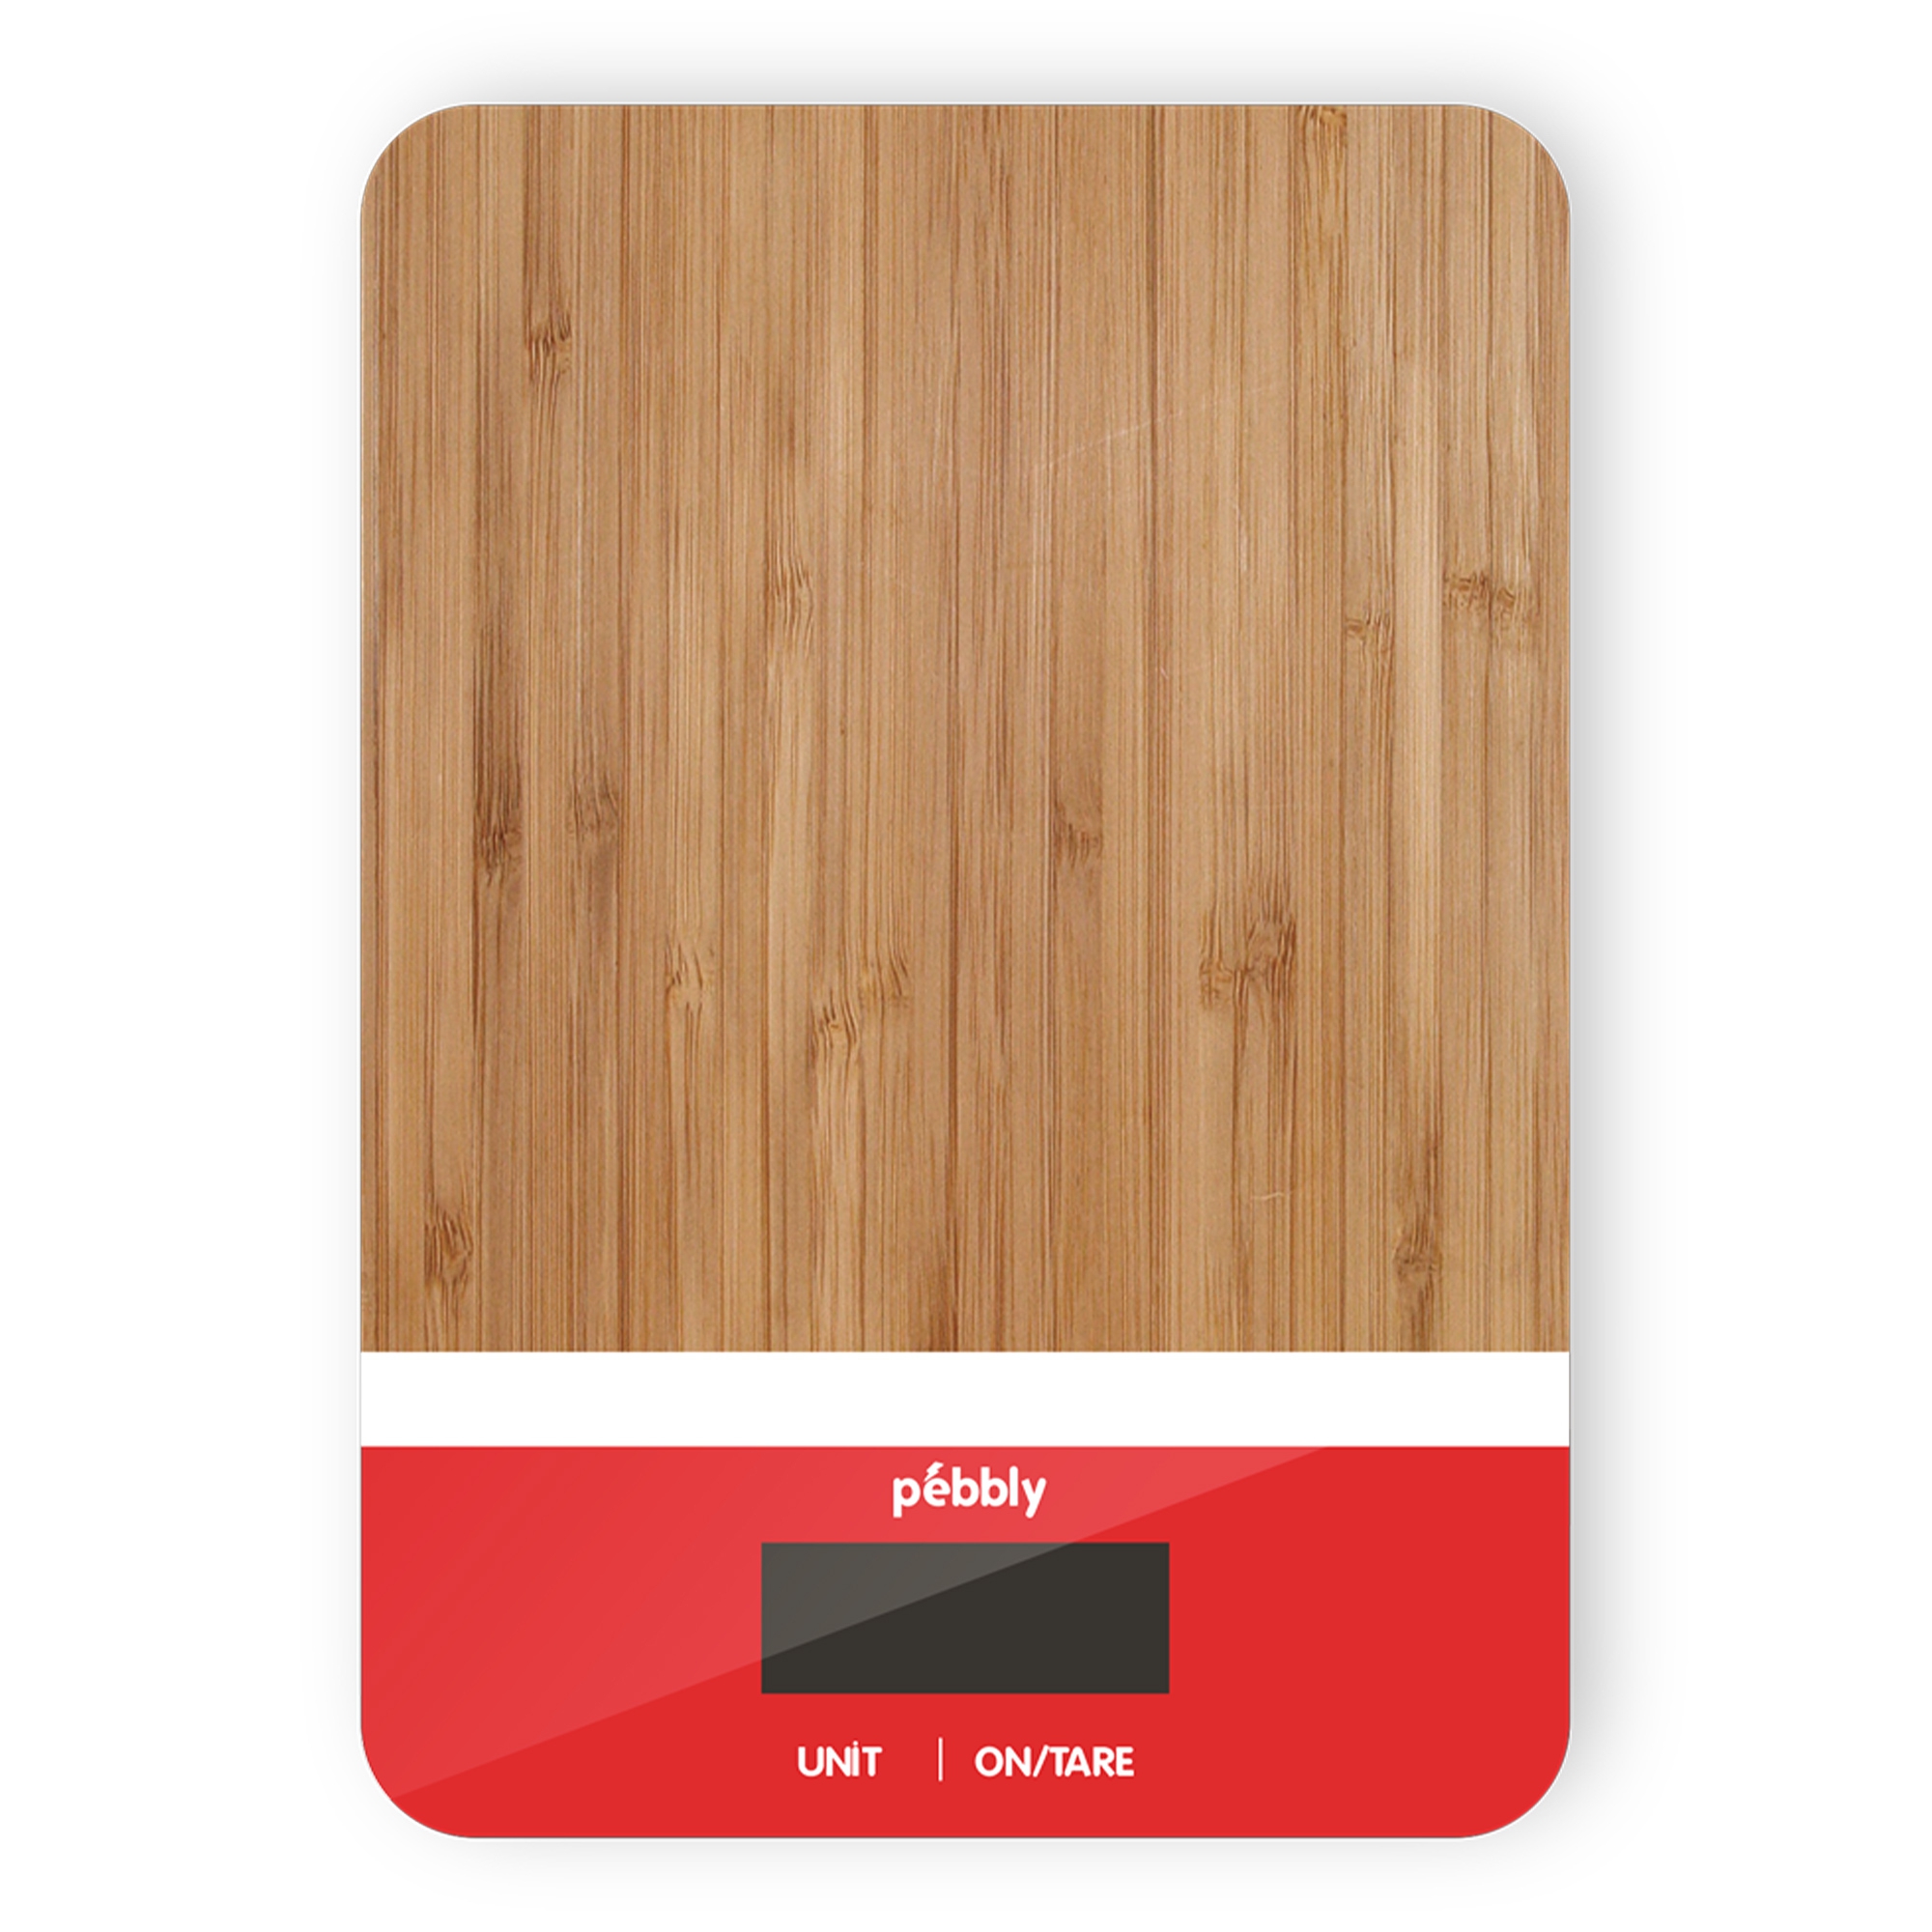 Pebbly - Rectangular bamboo kitchen scale  - Red